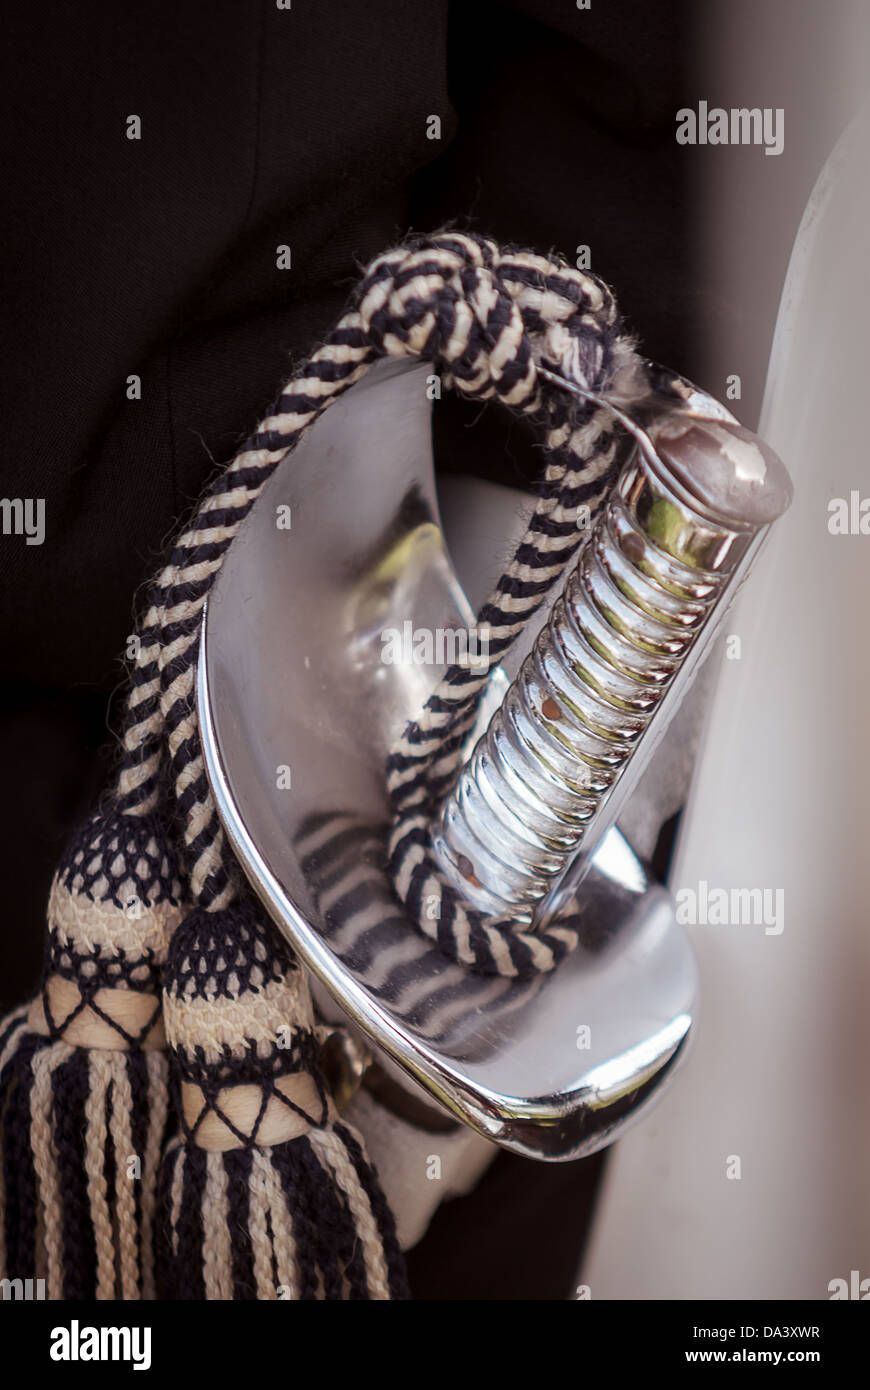 A ceremonial sword worn by military personnel on parade. Stock Photo